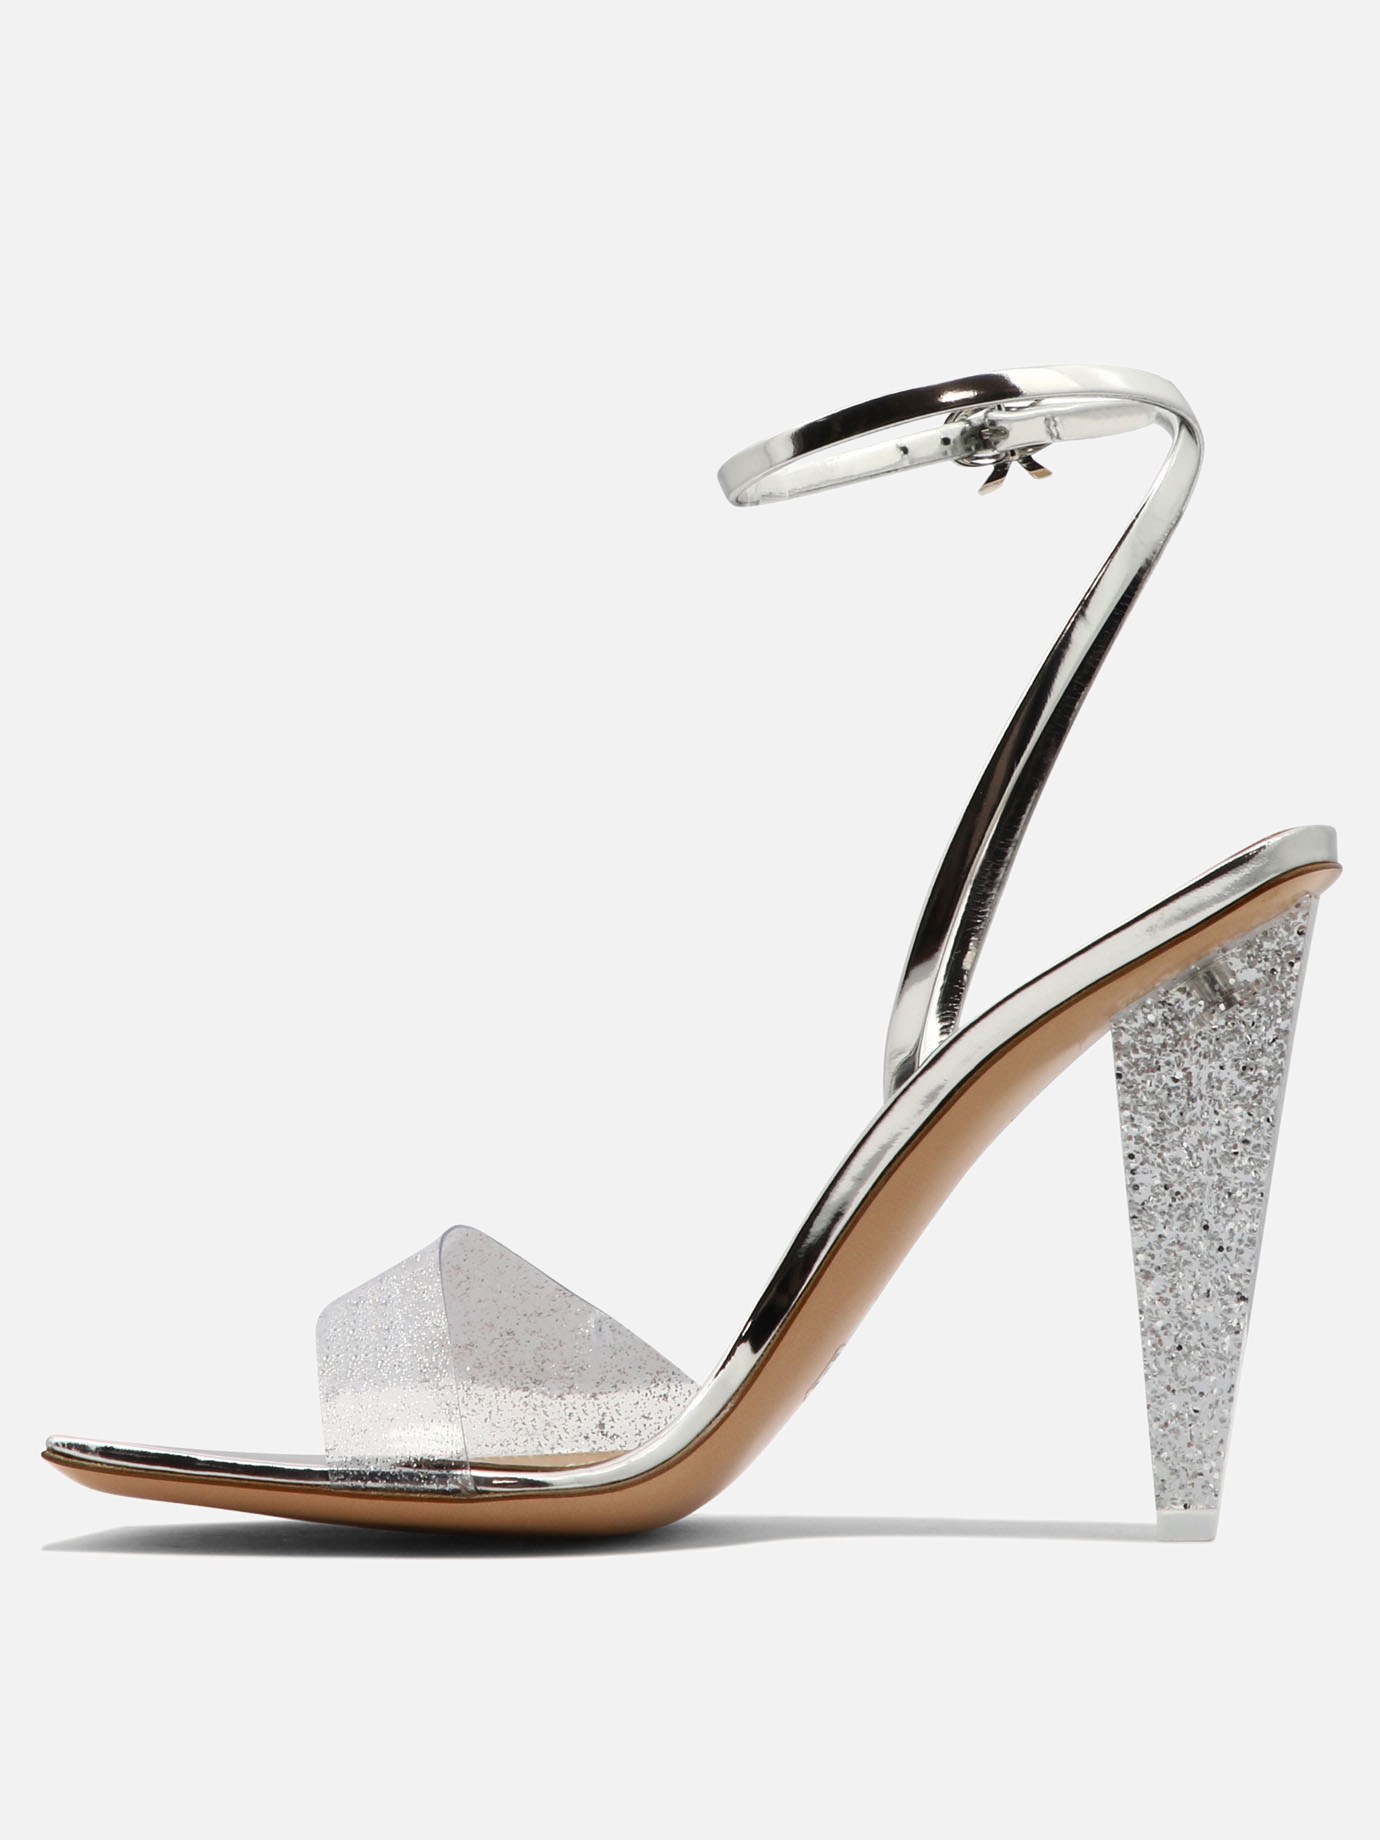  Odyssey  sandals by Gianvito Rossi